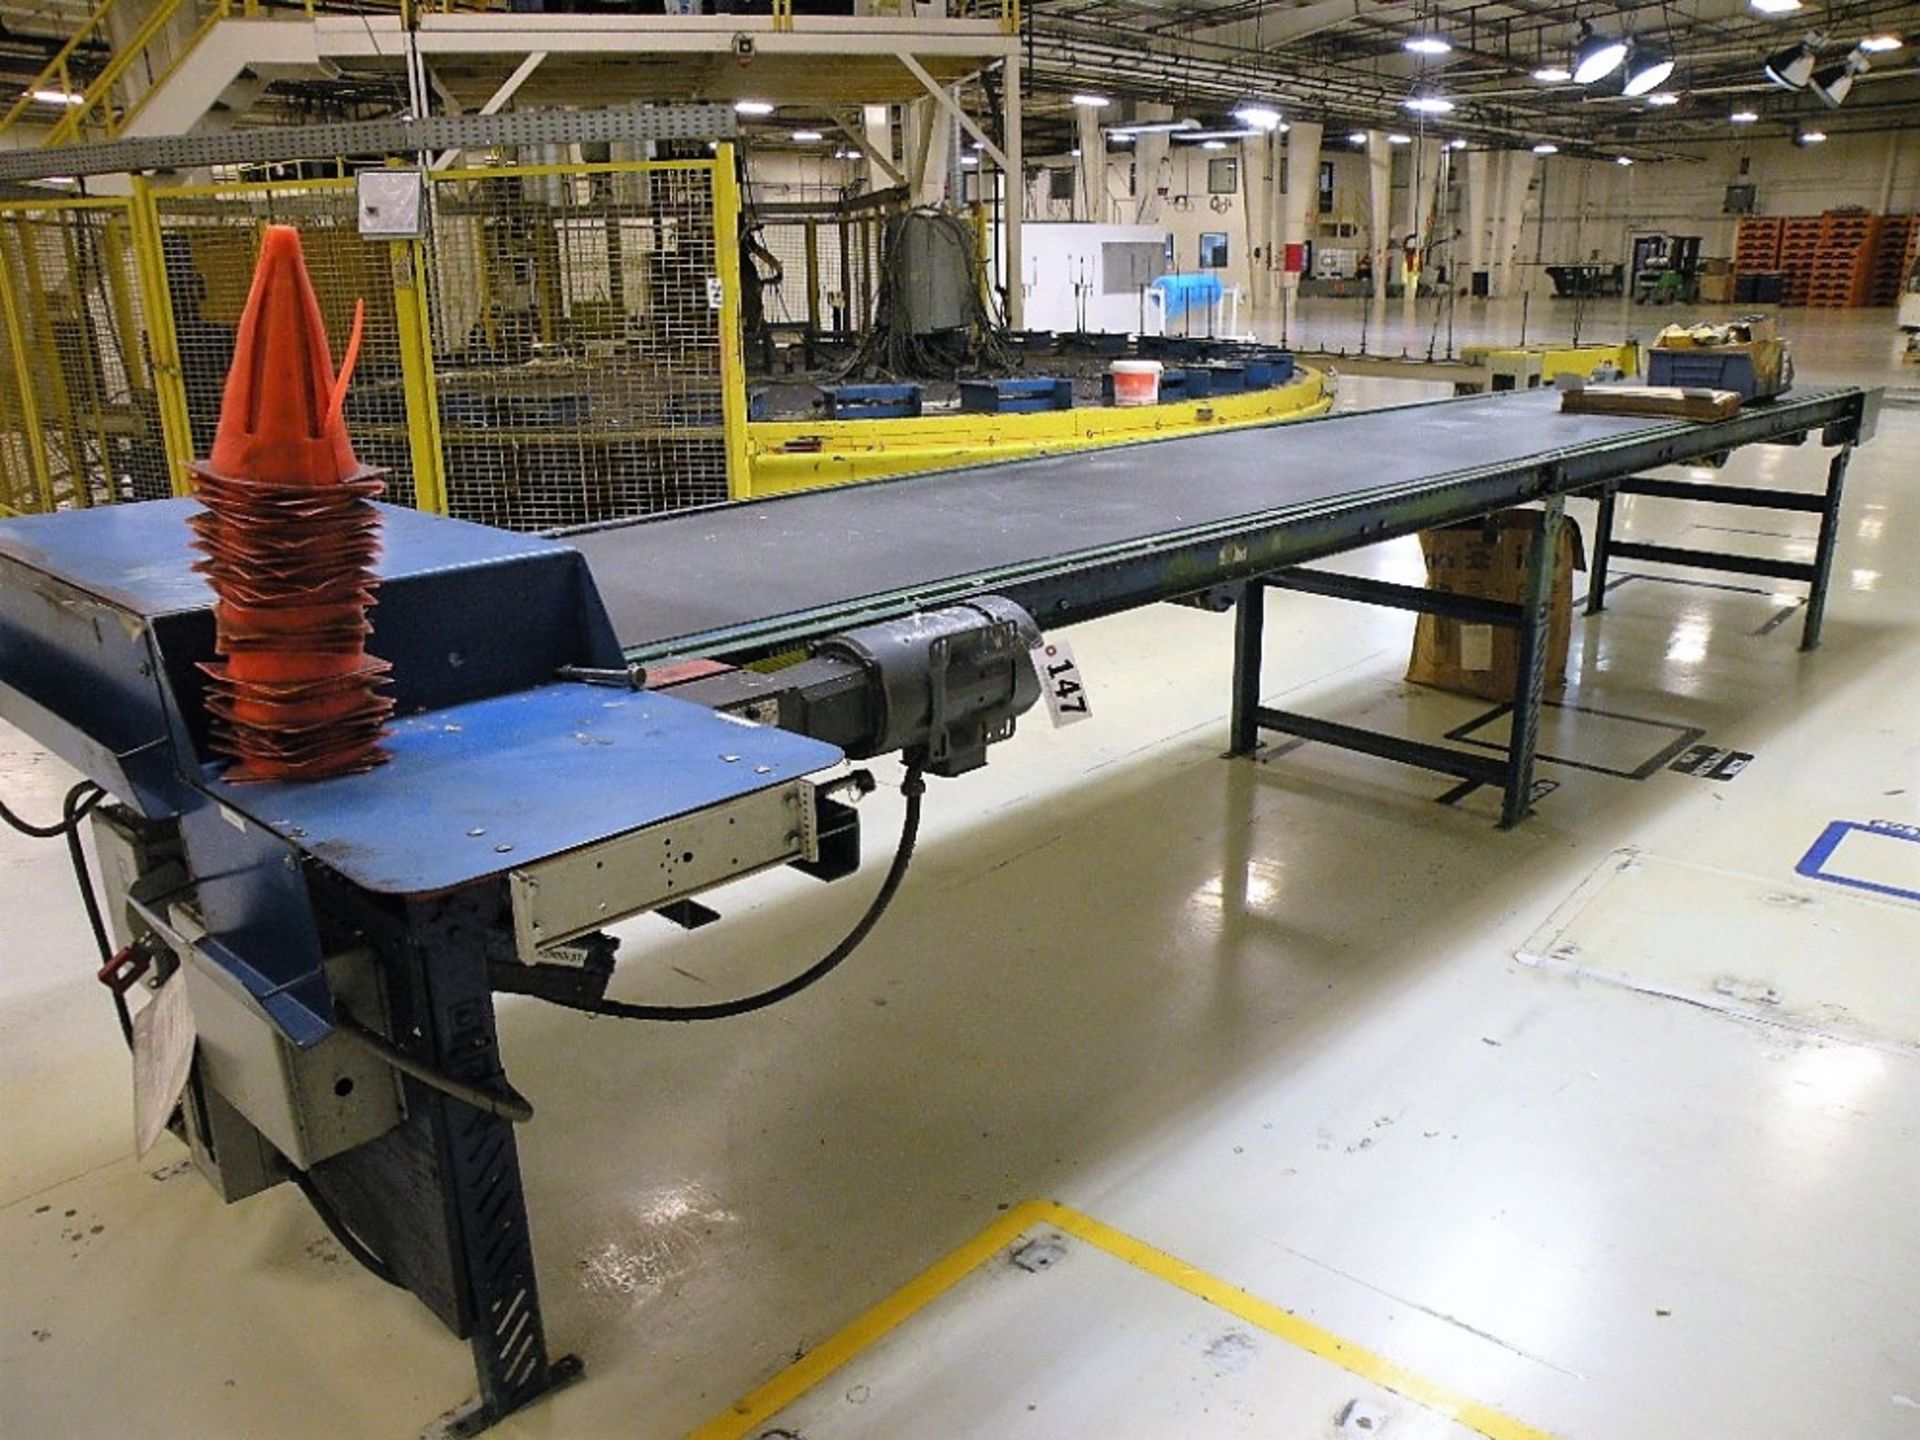 Motorized Conveyor with Rubber Belt: Approx. 30" x 20'